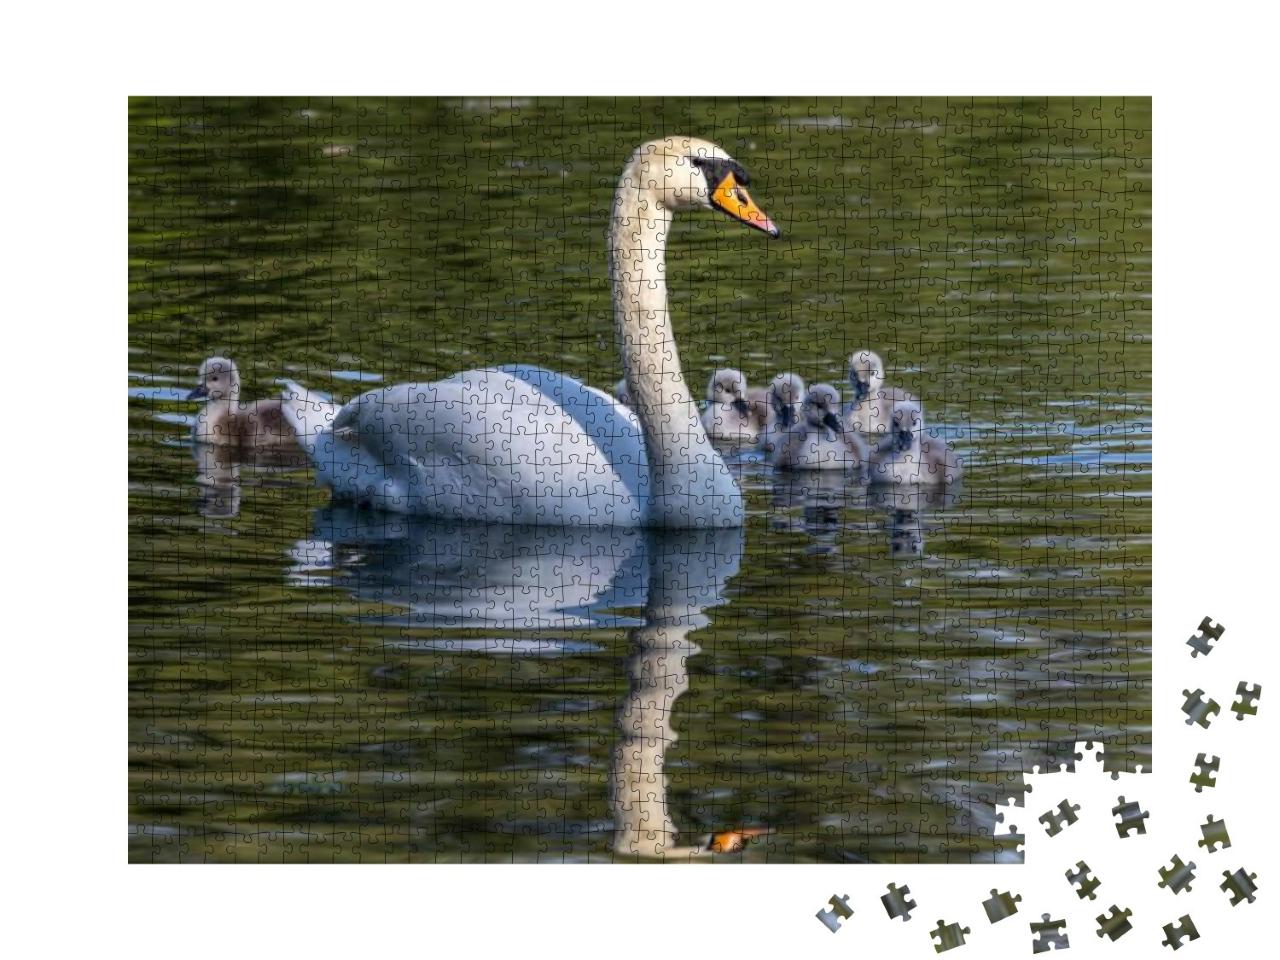 Mute Swan Family. Mother with Babies. Cygnus Olor is a Sp... Jigsaw Puzzle with 1000 pieces